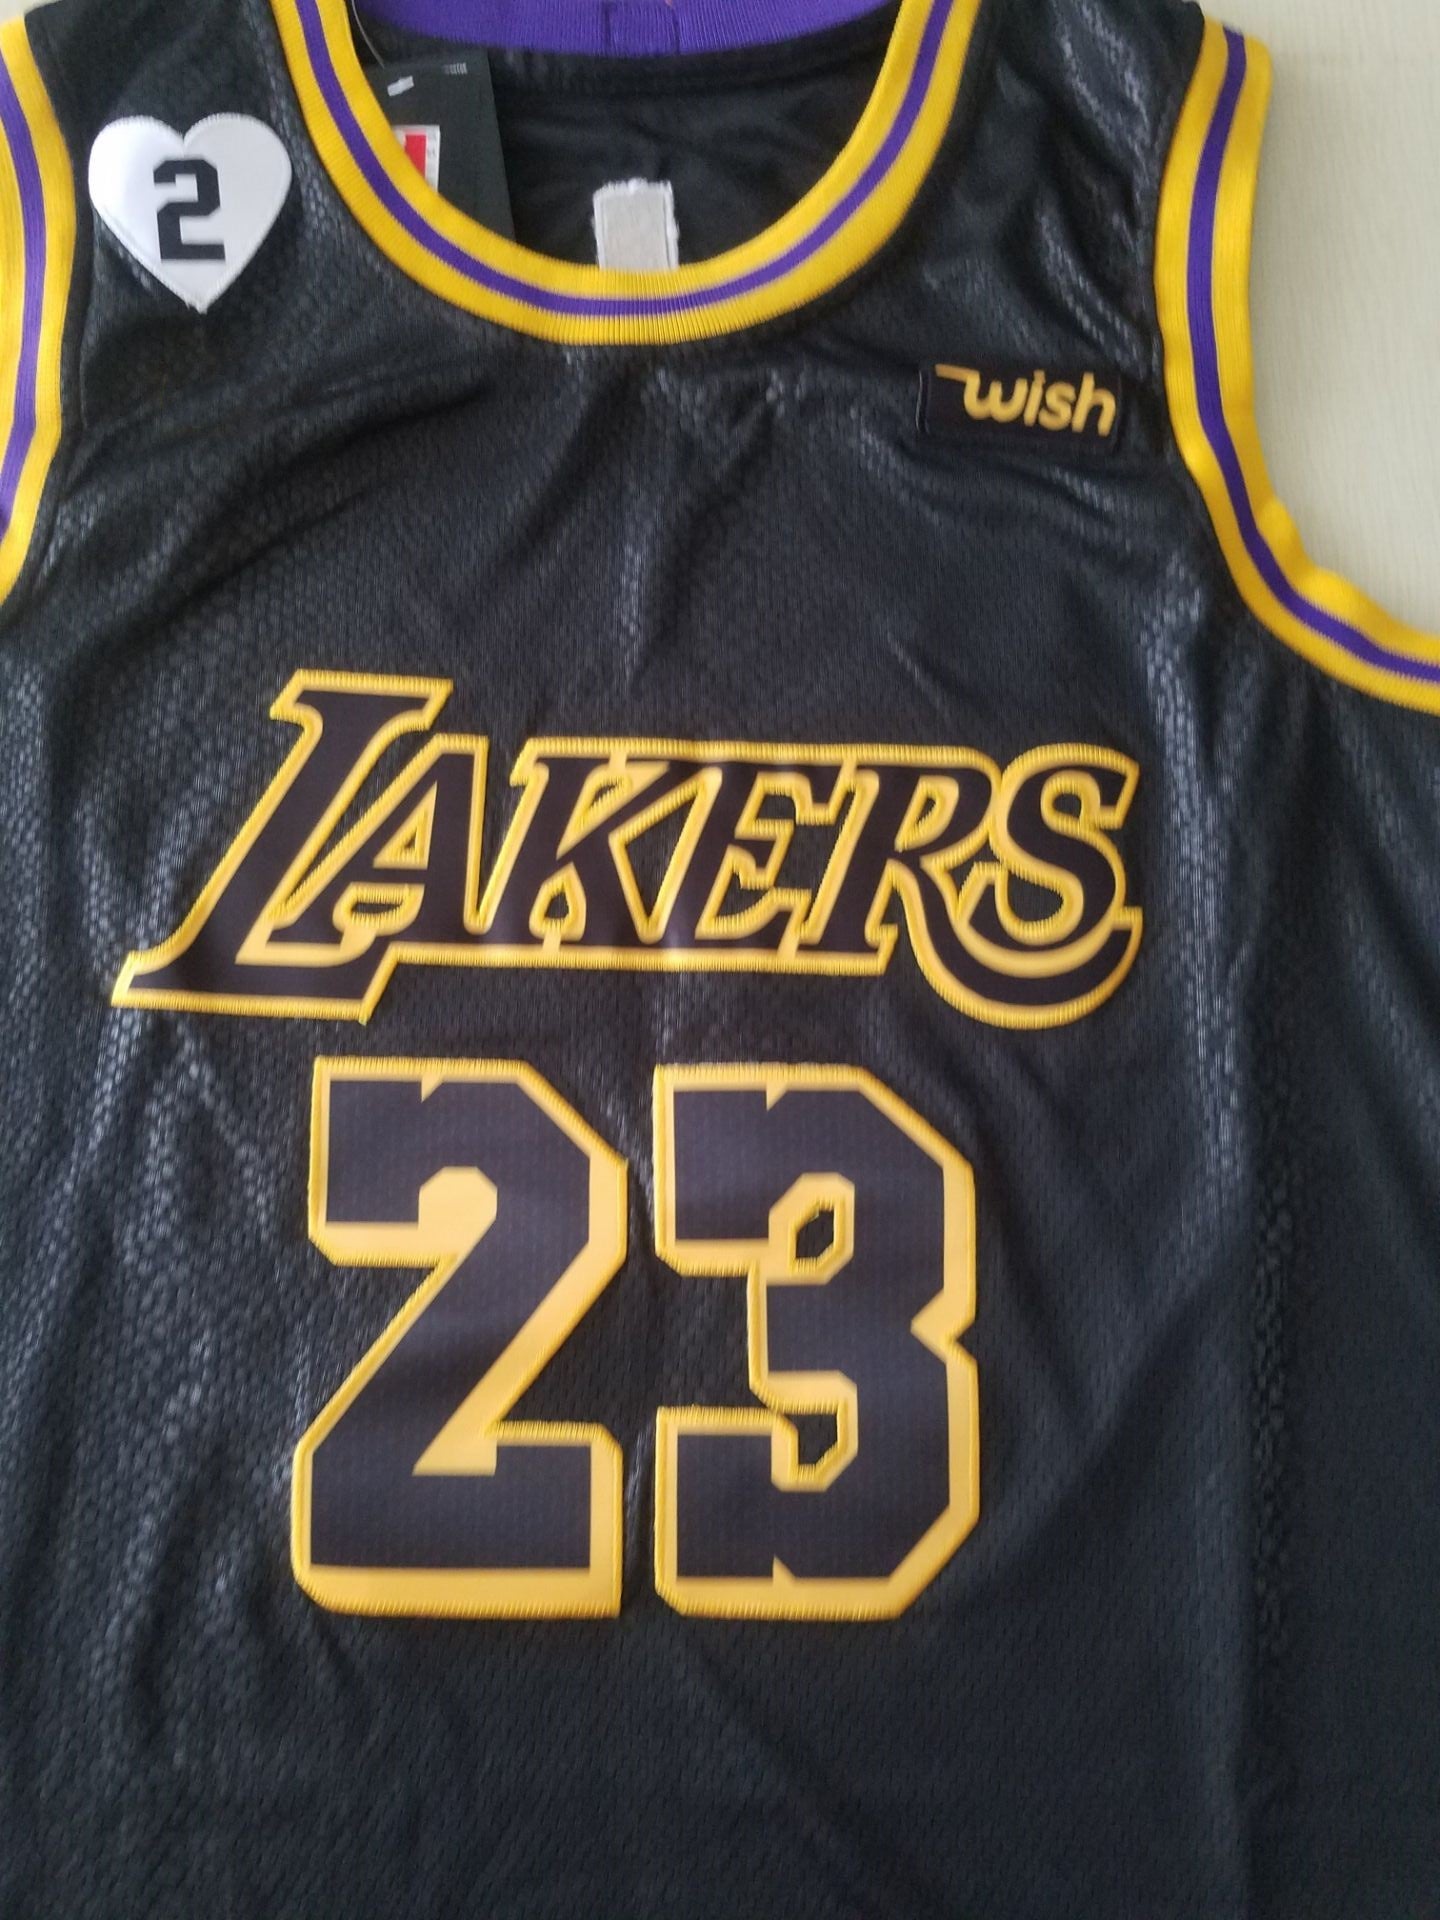 Men's Los Angeles Lakers Lebron James #23 Final Path Jersey Stitched